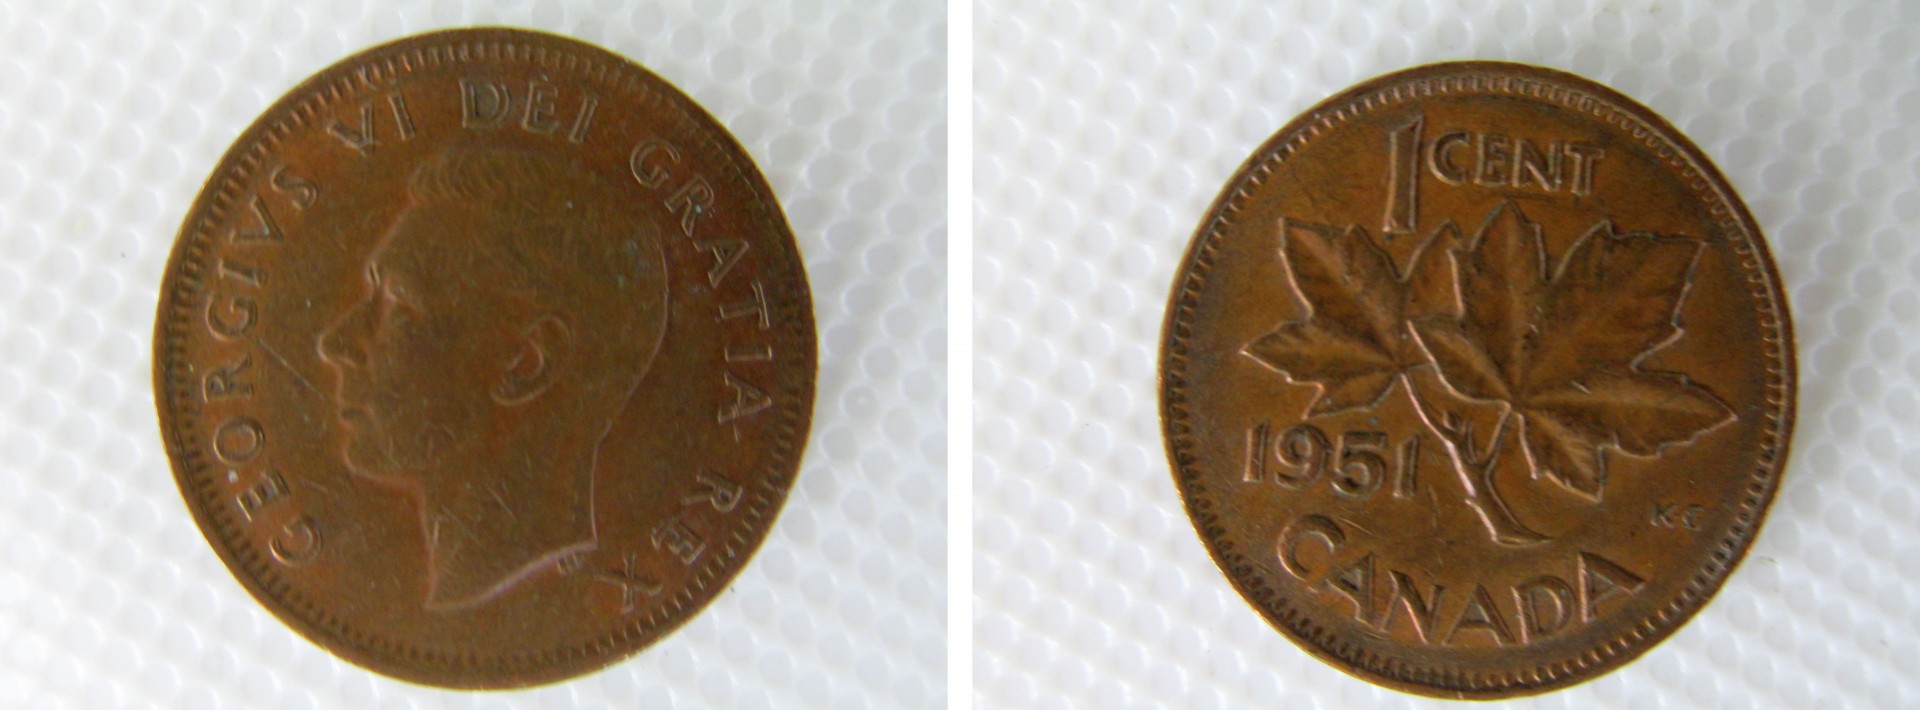 canadian canada cent free photo